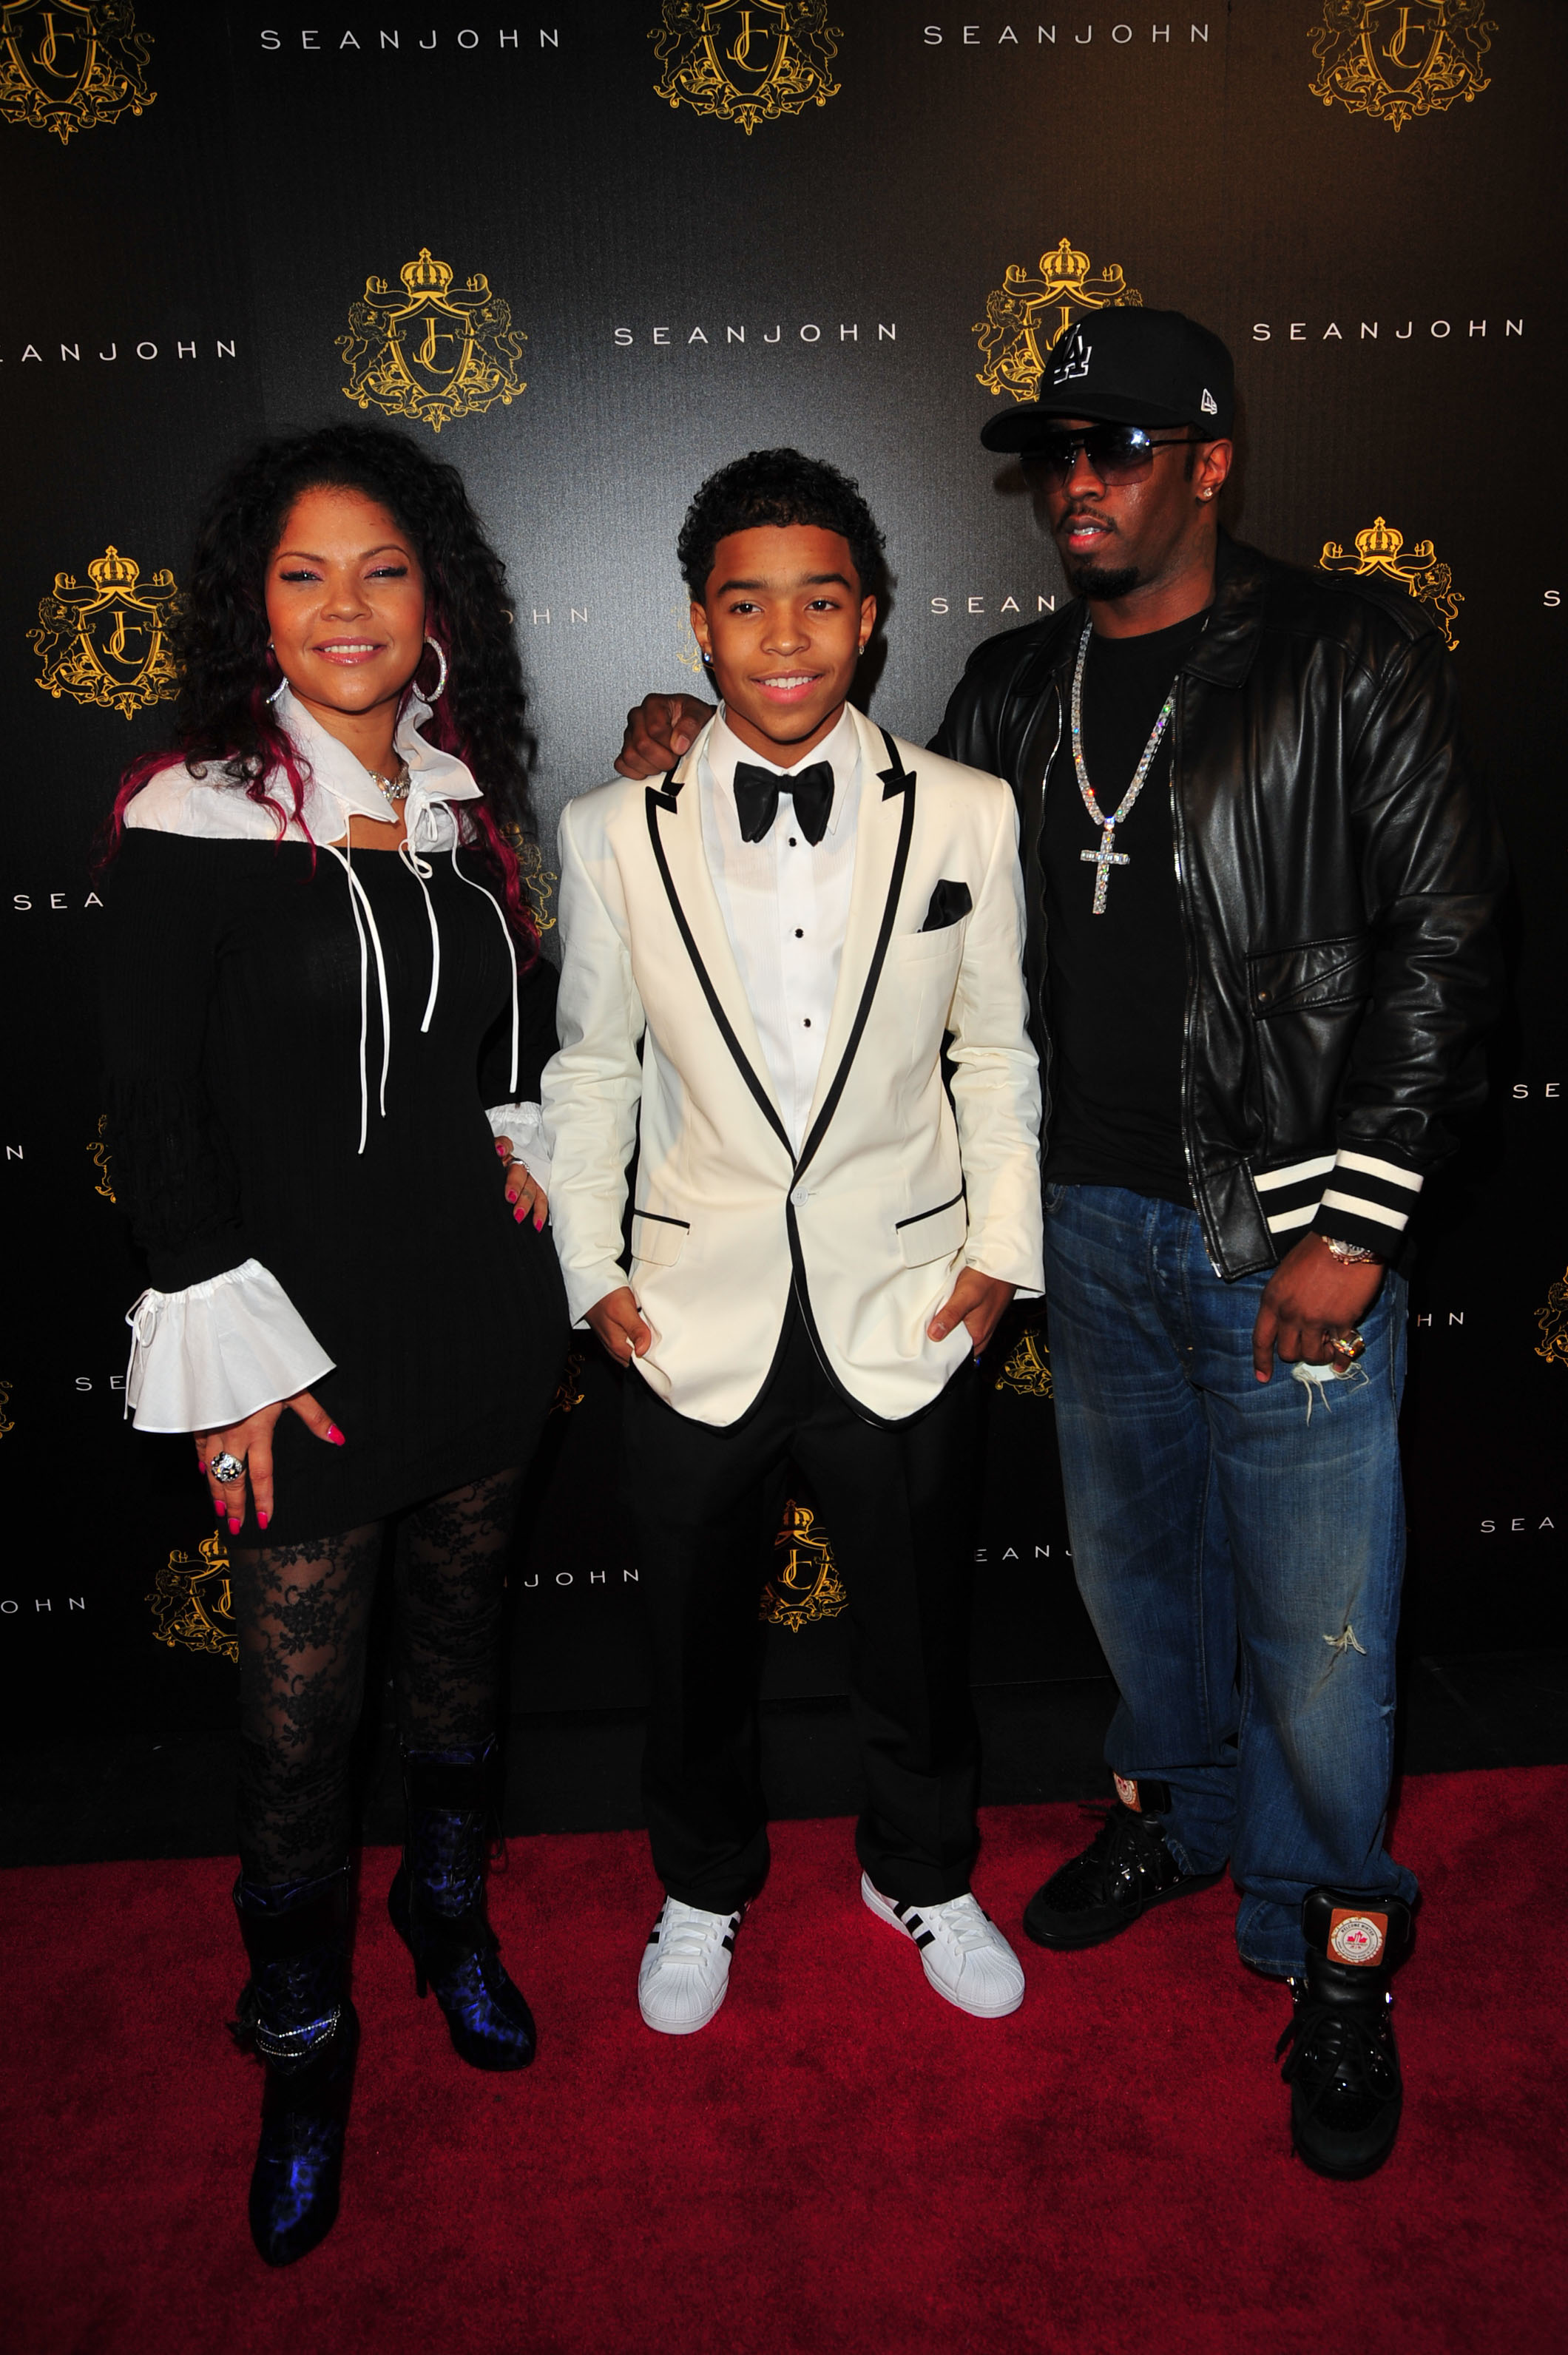 Sean "Diddy" Combs, Justin Combs and Misa Hylton at Justin's 16th birthday party in 2010.